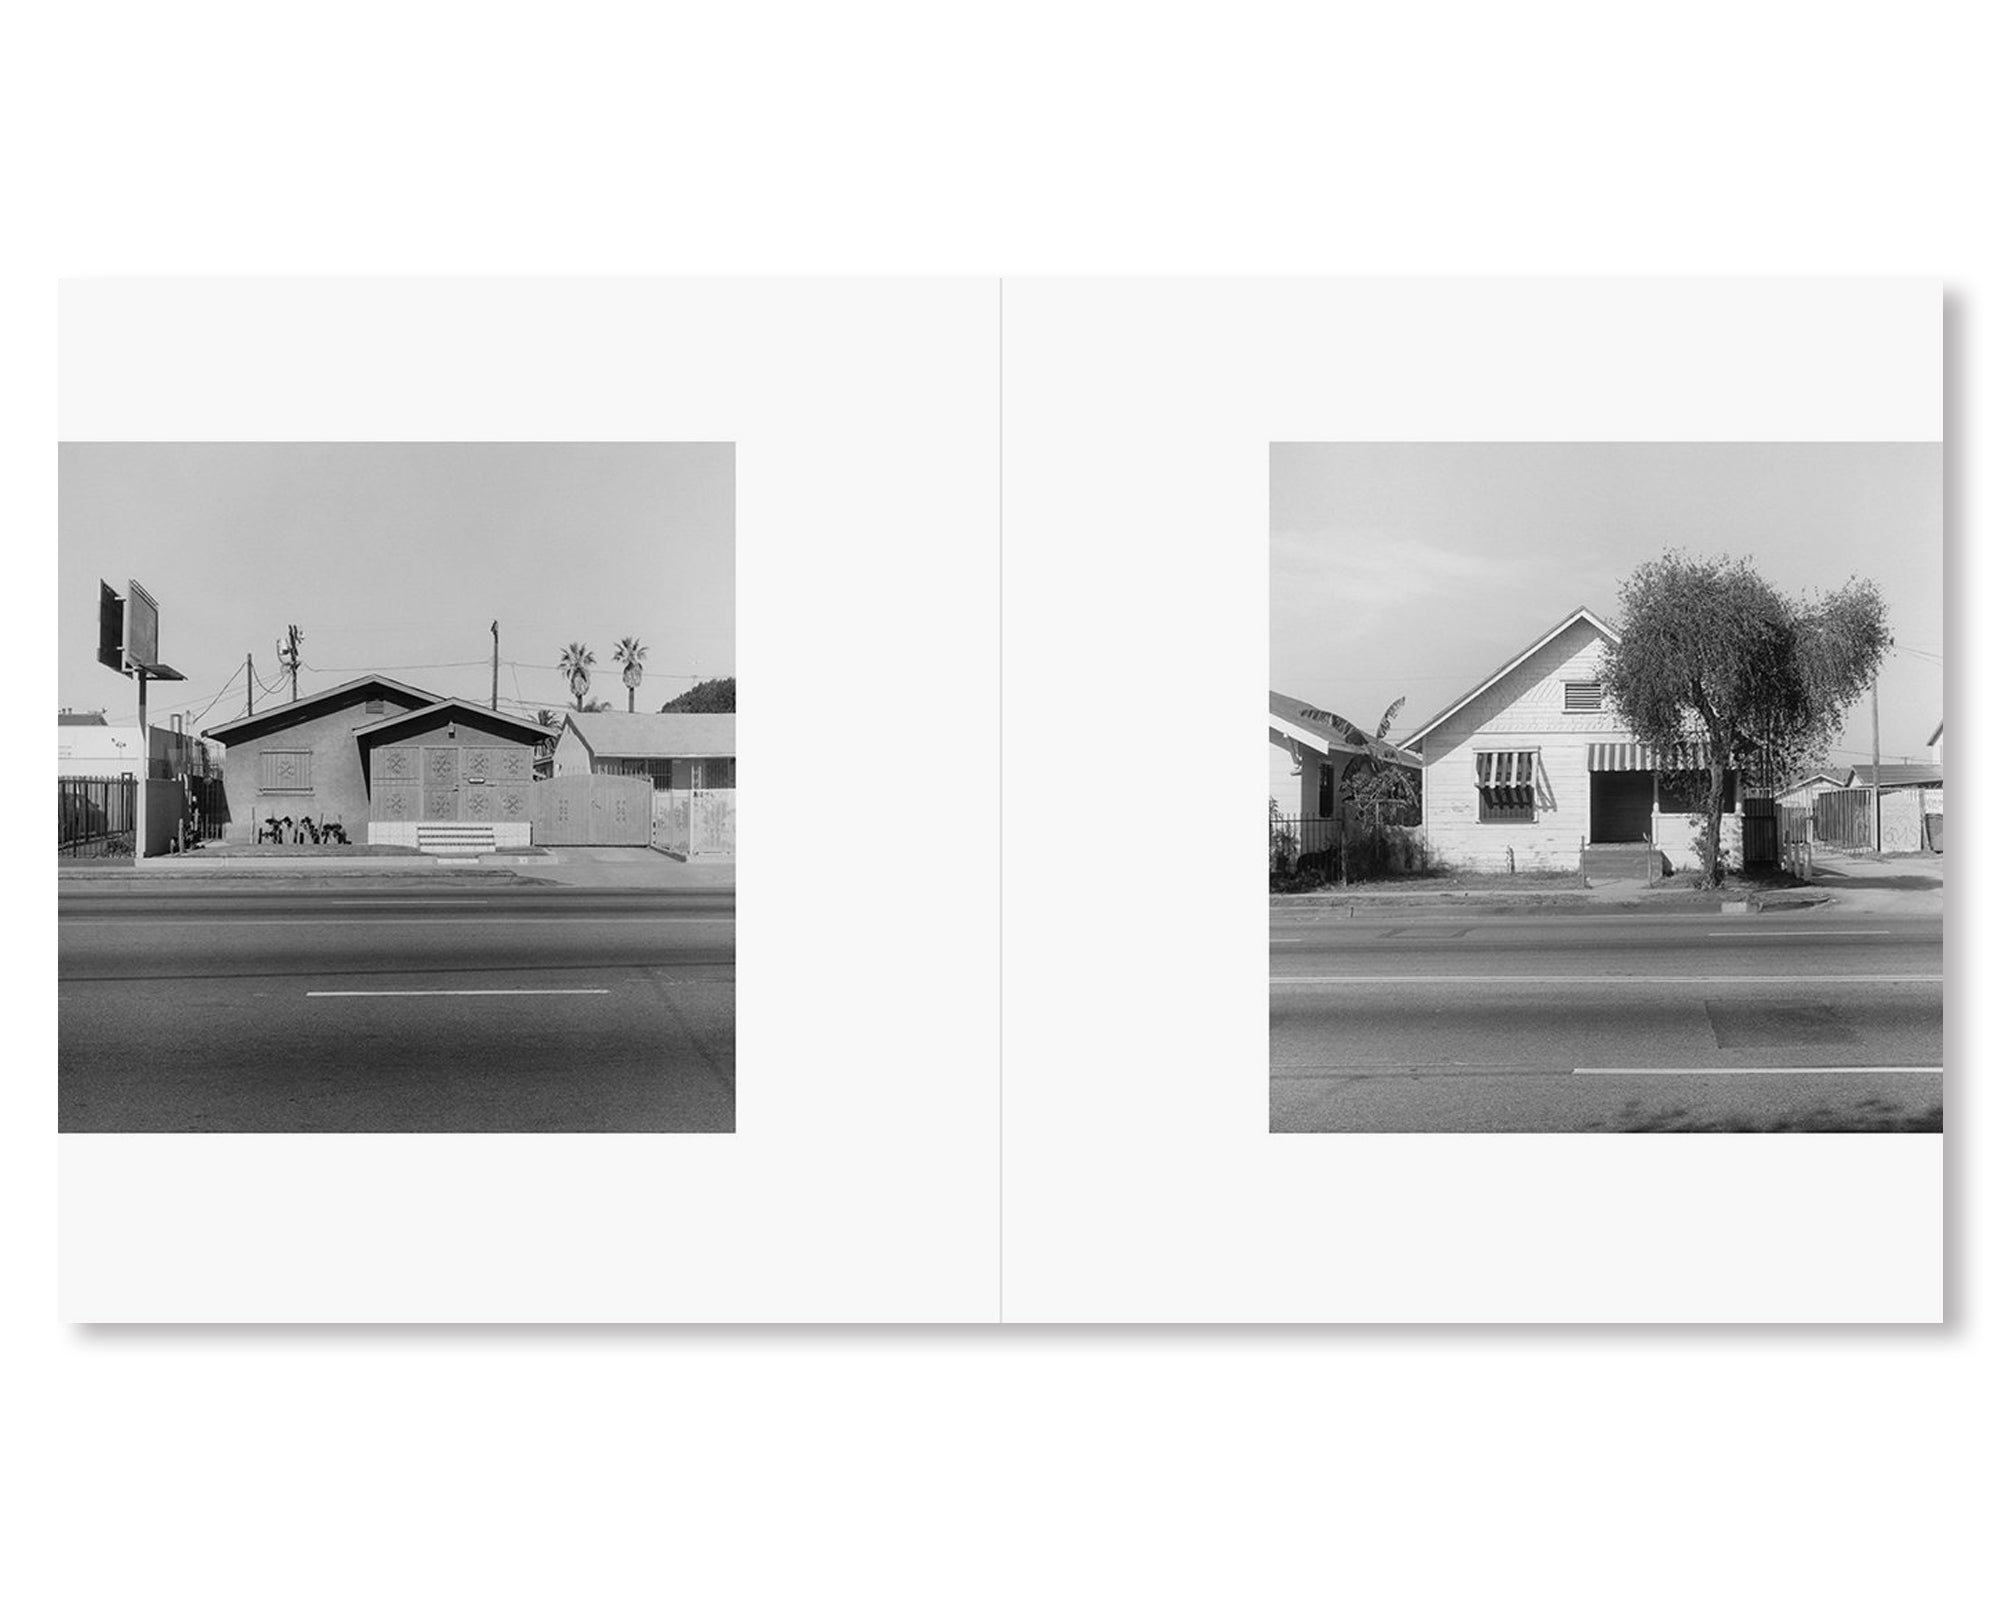 SEVENTY-TWO AND ONE HALF MILES ACROSS LOS ANGELES by Mark Ruwedel